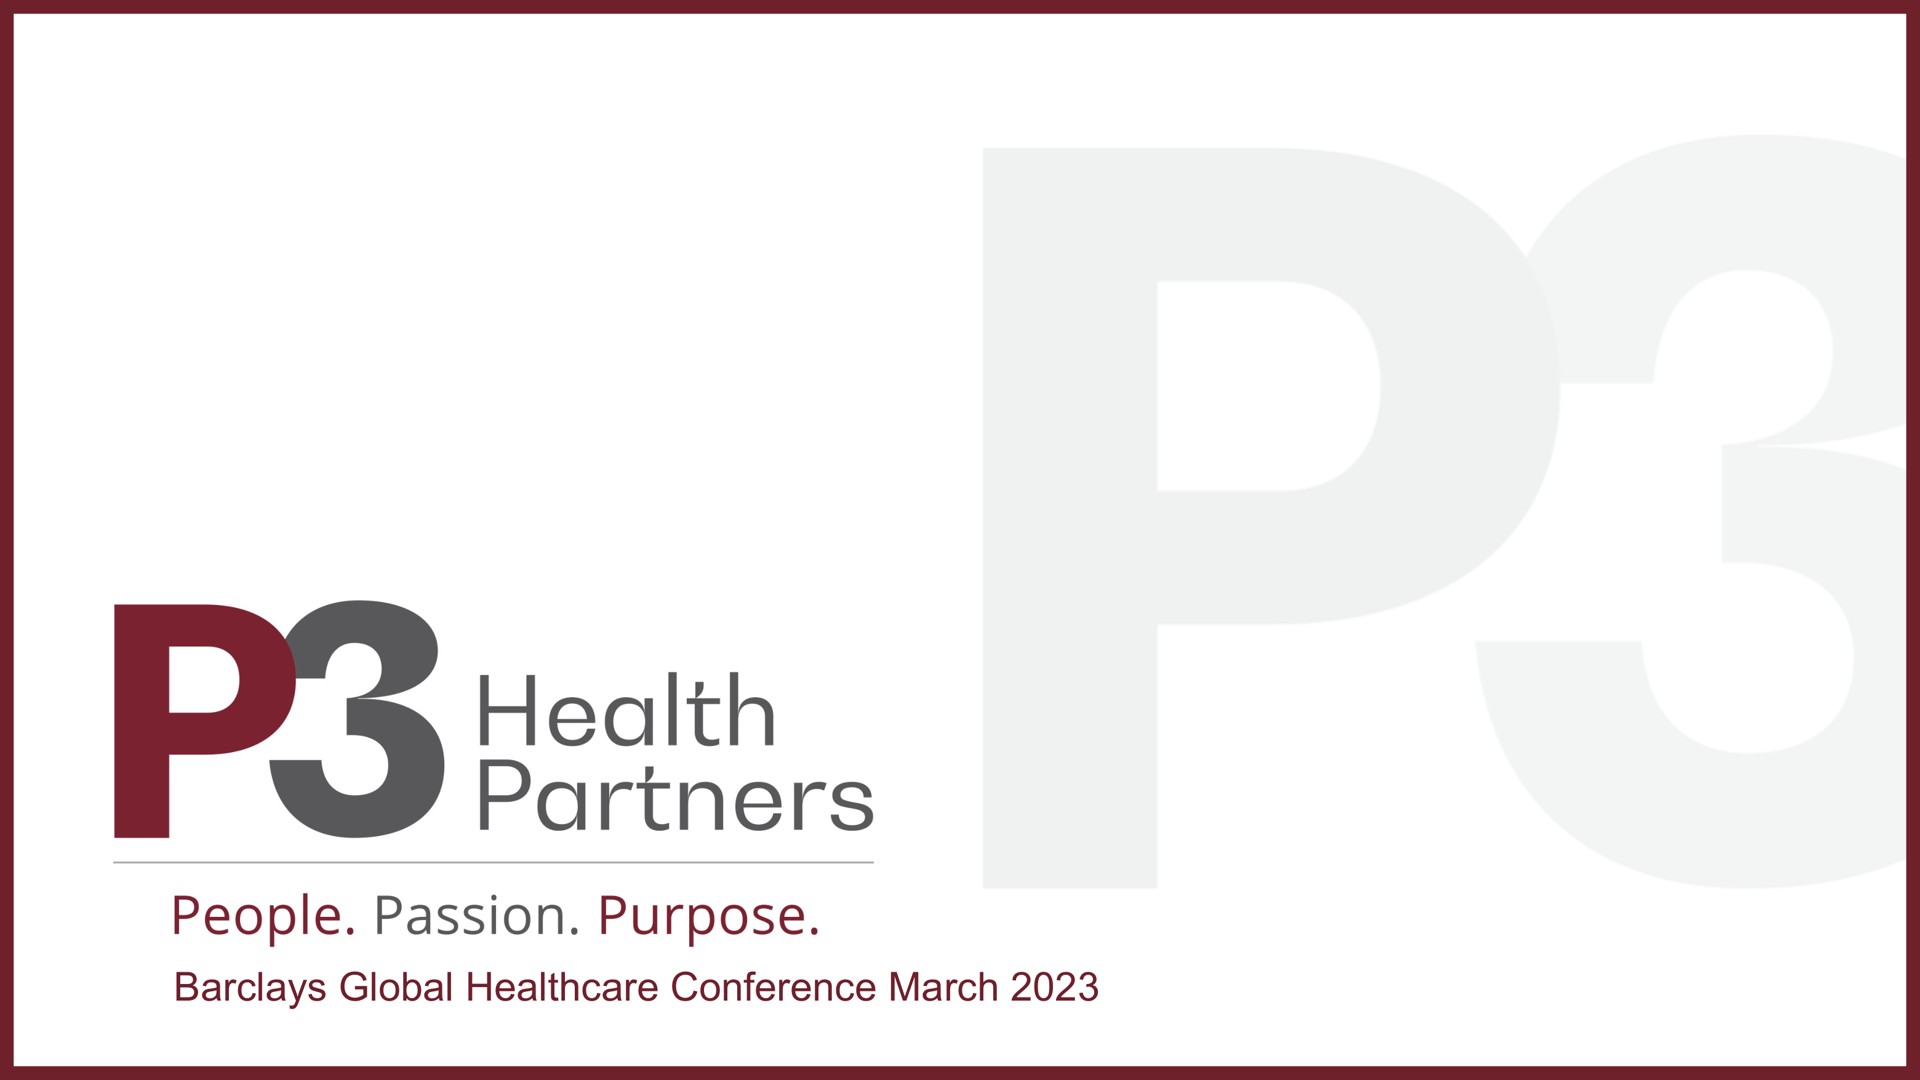 annual health care conference march global conference march partners people passion purpose | P3 Health Partners